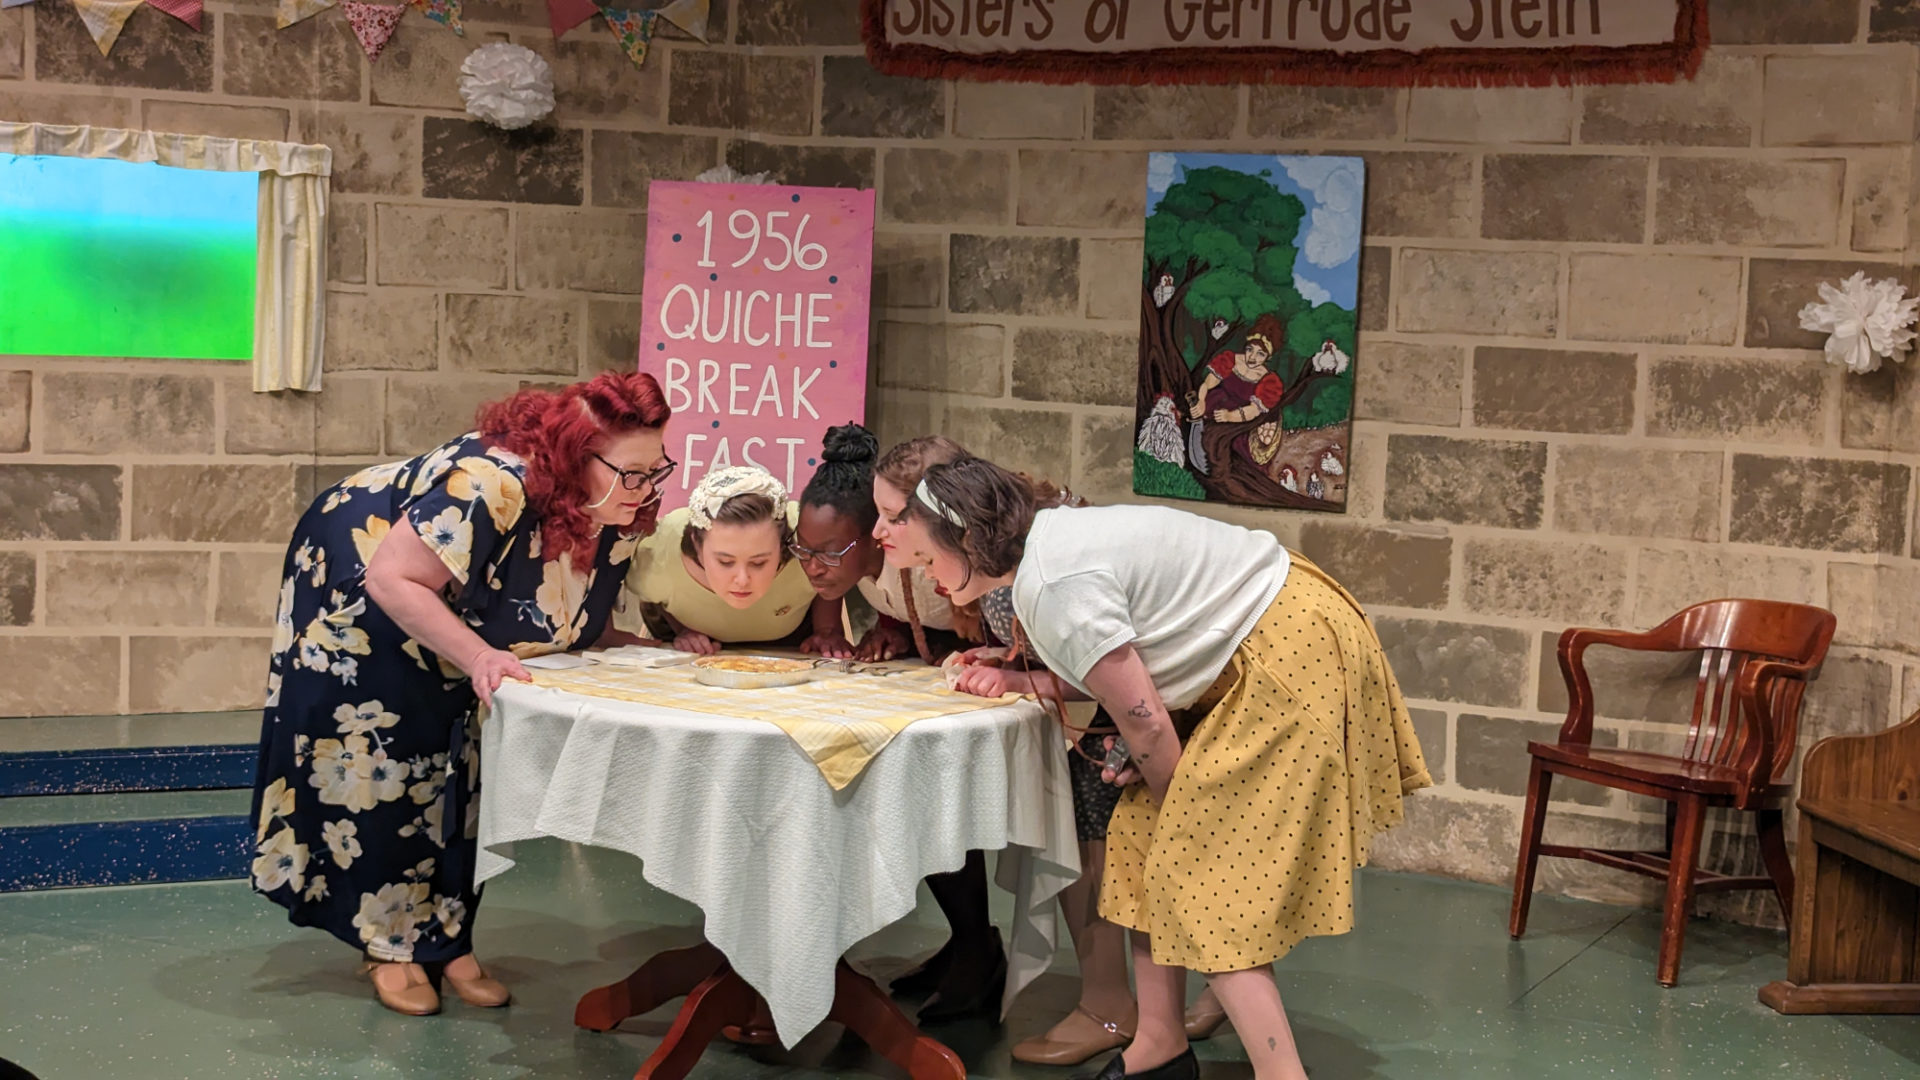 Photo of the set with cast, 5 Lesbians Eating a Quiche at the Station Theatre. Four white women and one Black woman are leaning over a small round table smelling a quiche. They are dressed as women from the 1950s. L-R - Heather Smith-Holley, Ellen Magee, Tiphaine Kouadou, Zoë Dunn, Erin Roux